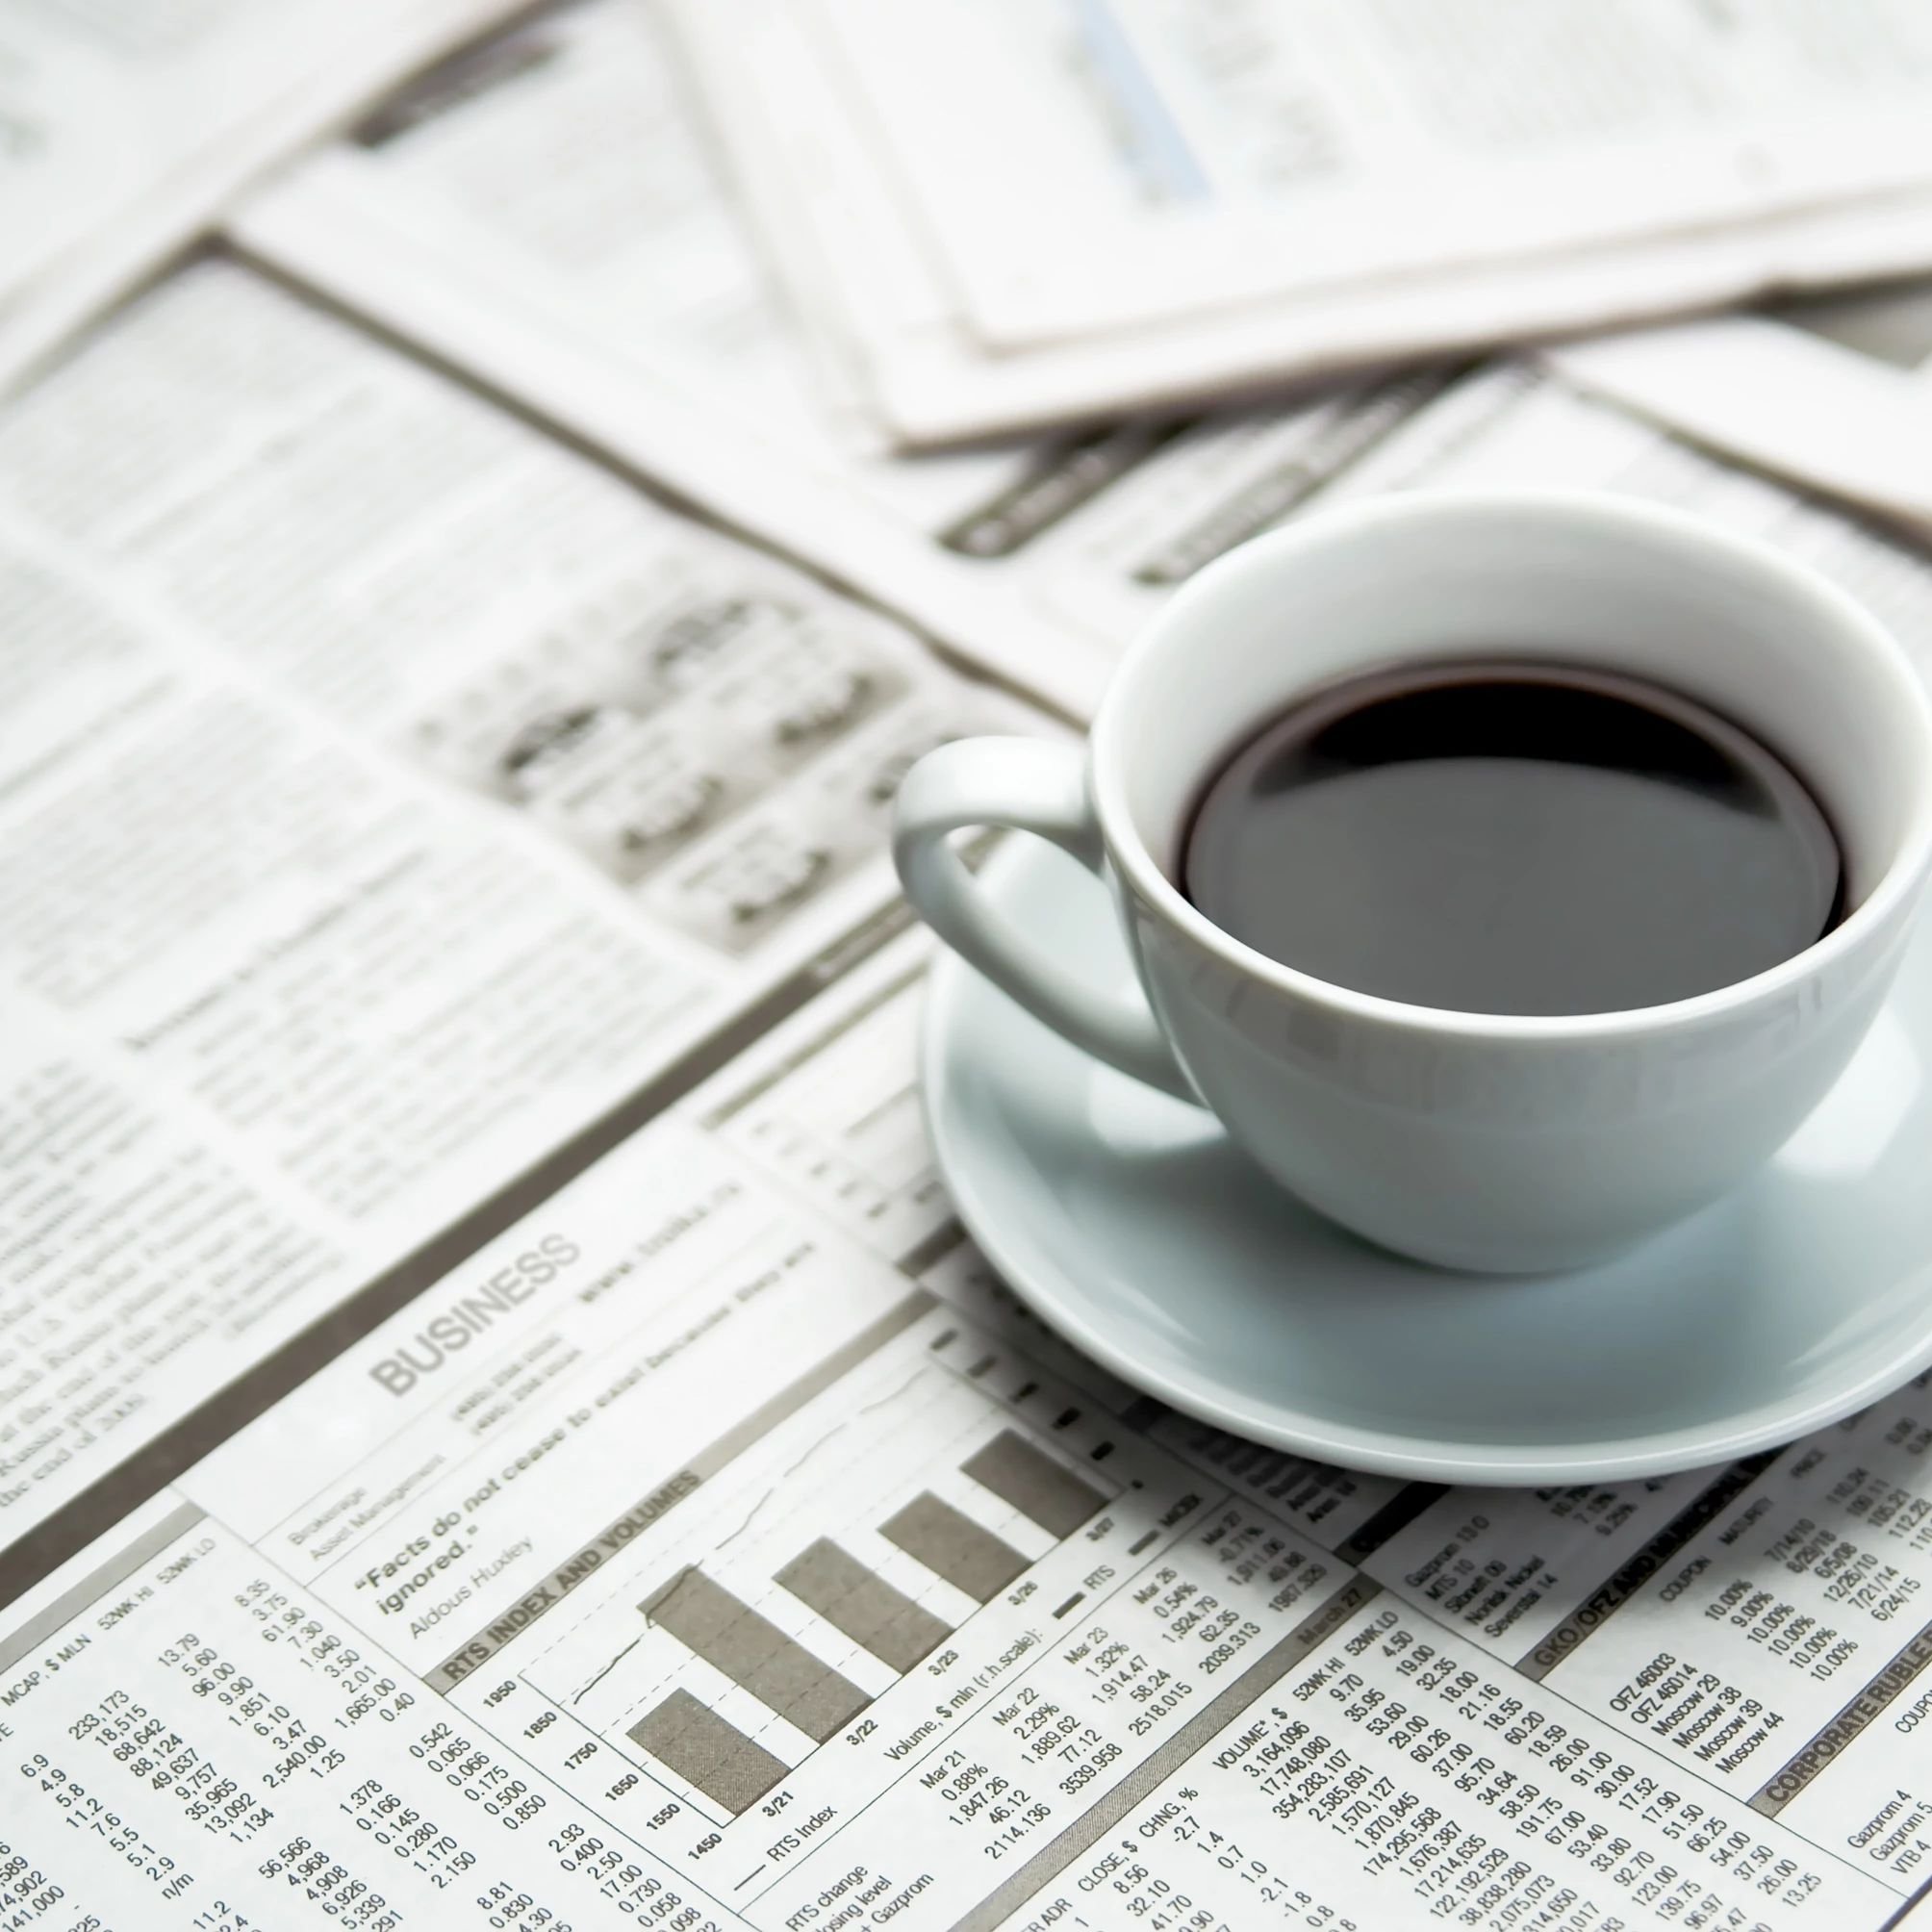 A cup of coffee on a newspaper